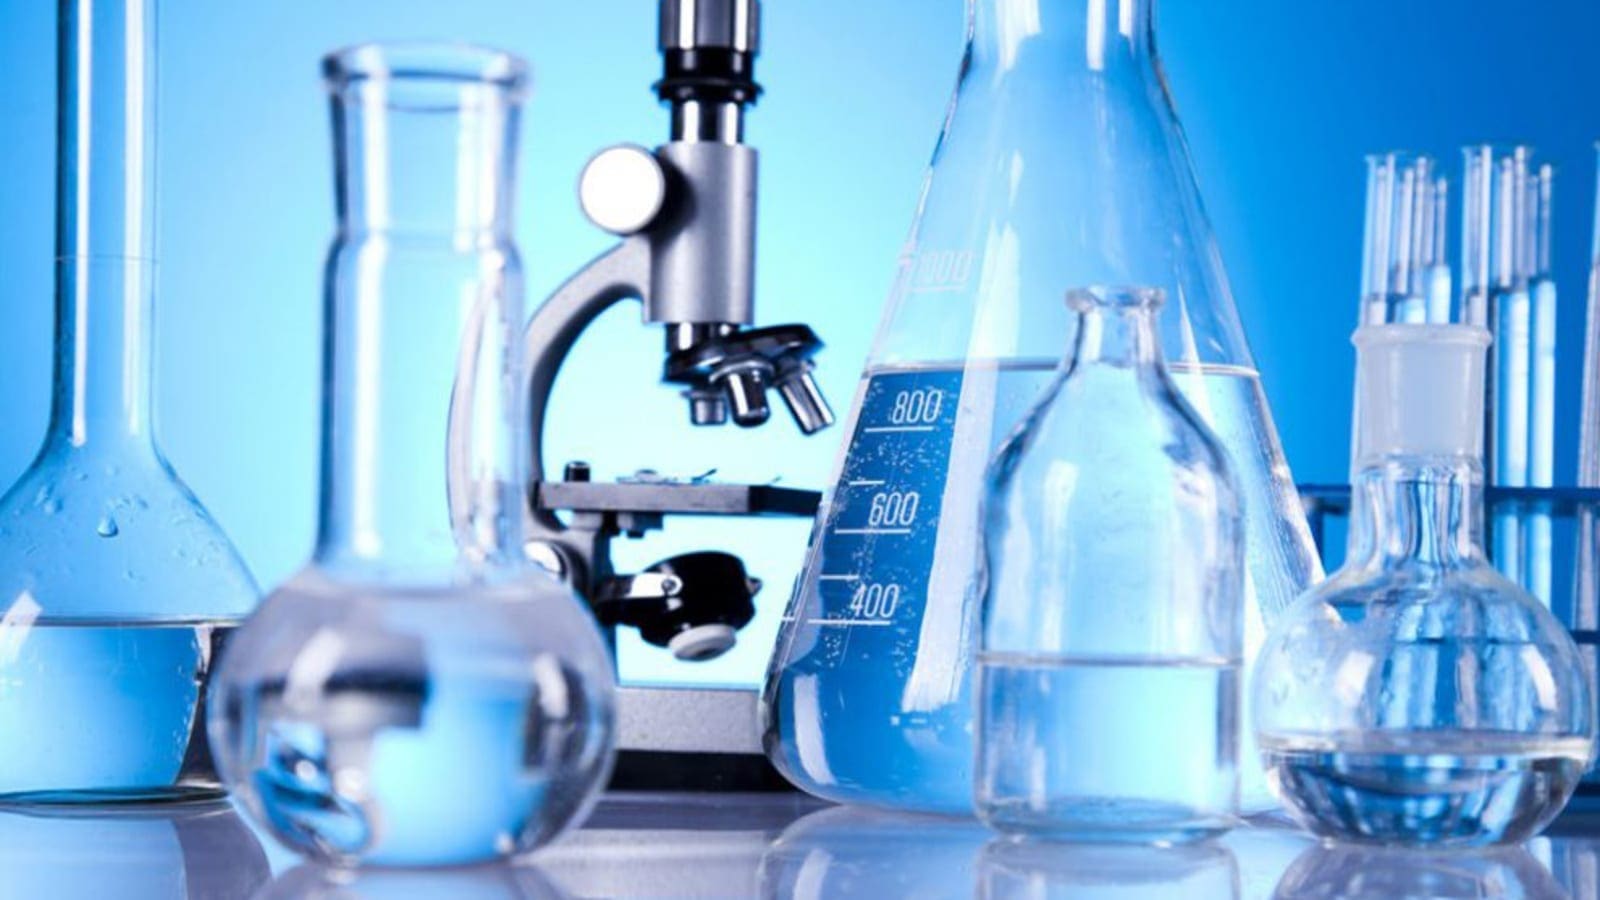 Coca-Cola Beverages South Africa backs laboratory supplies company through its SME Fund